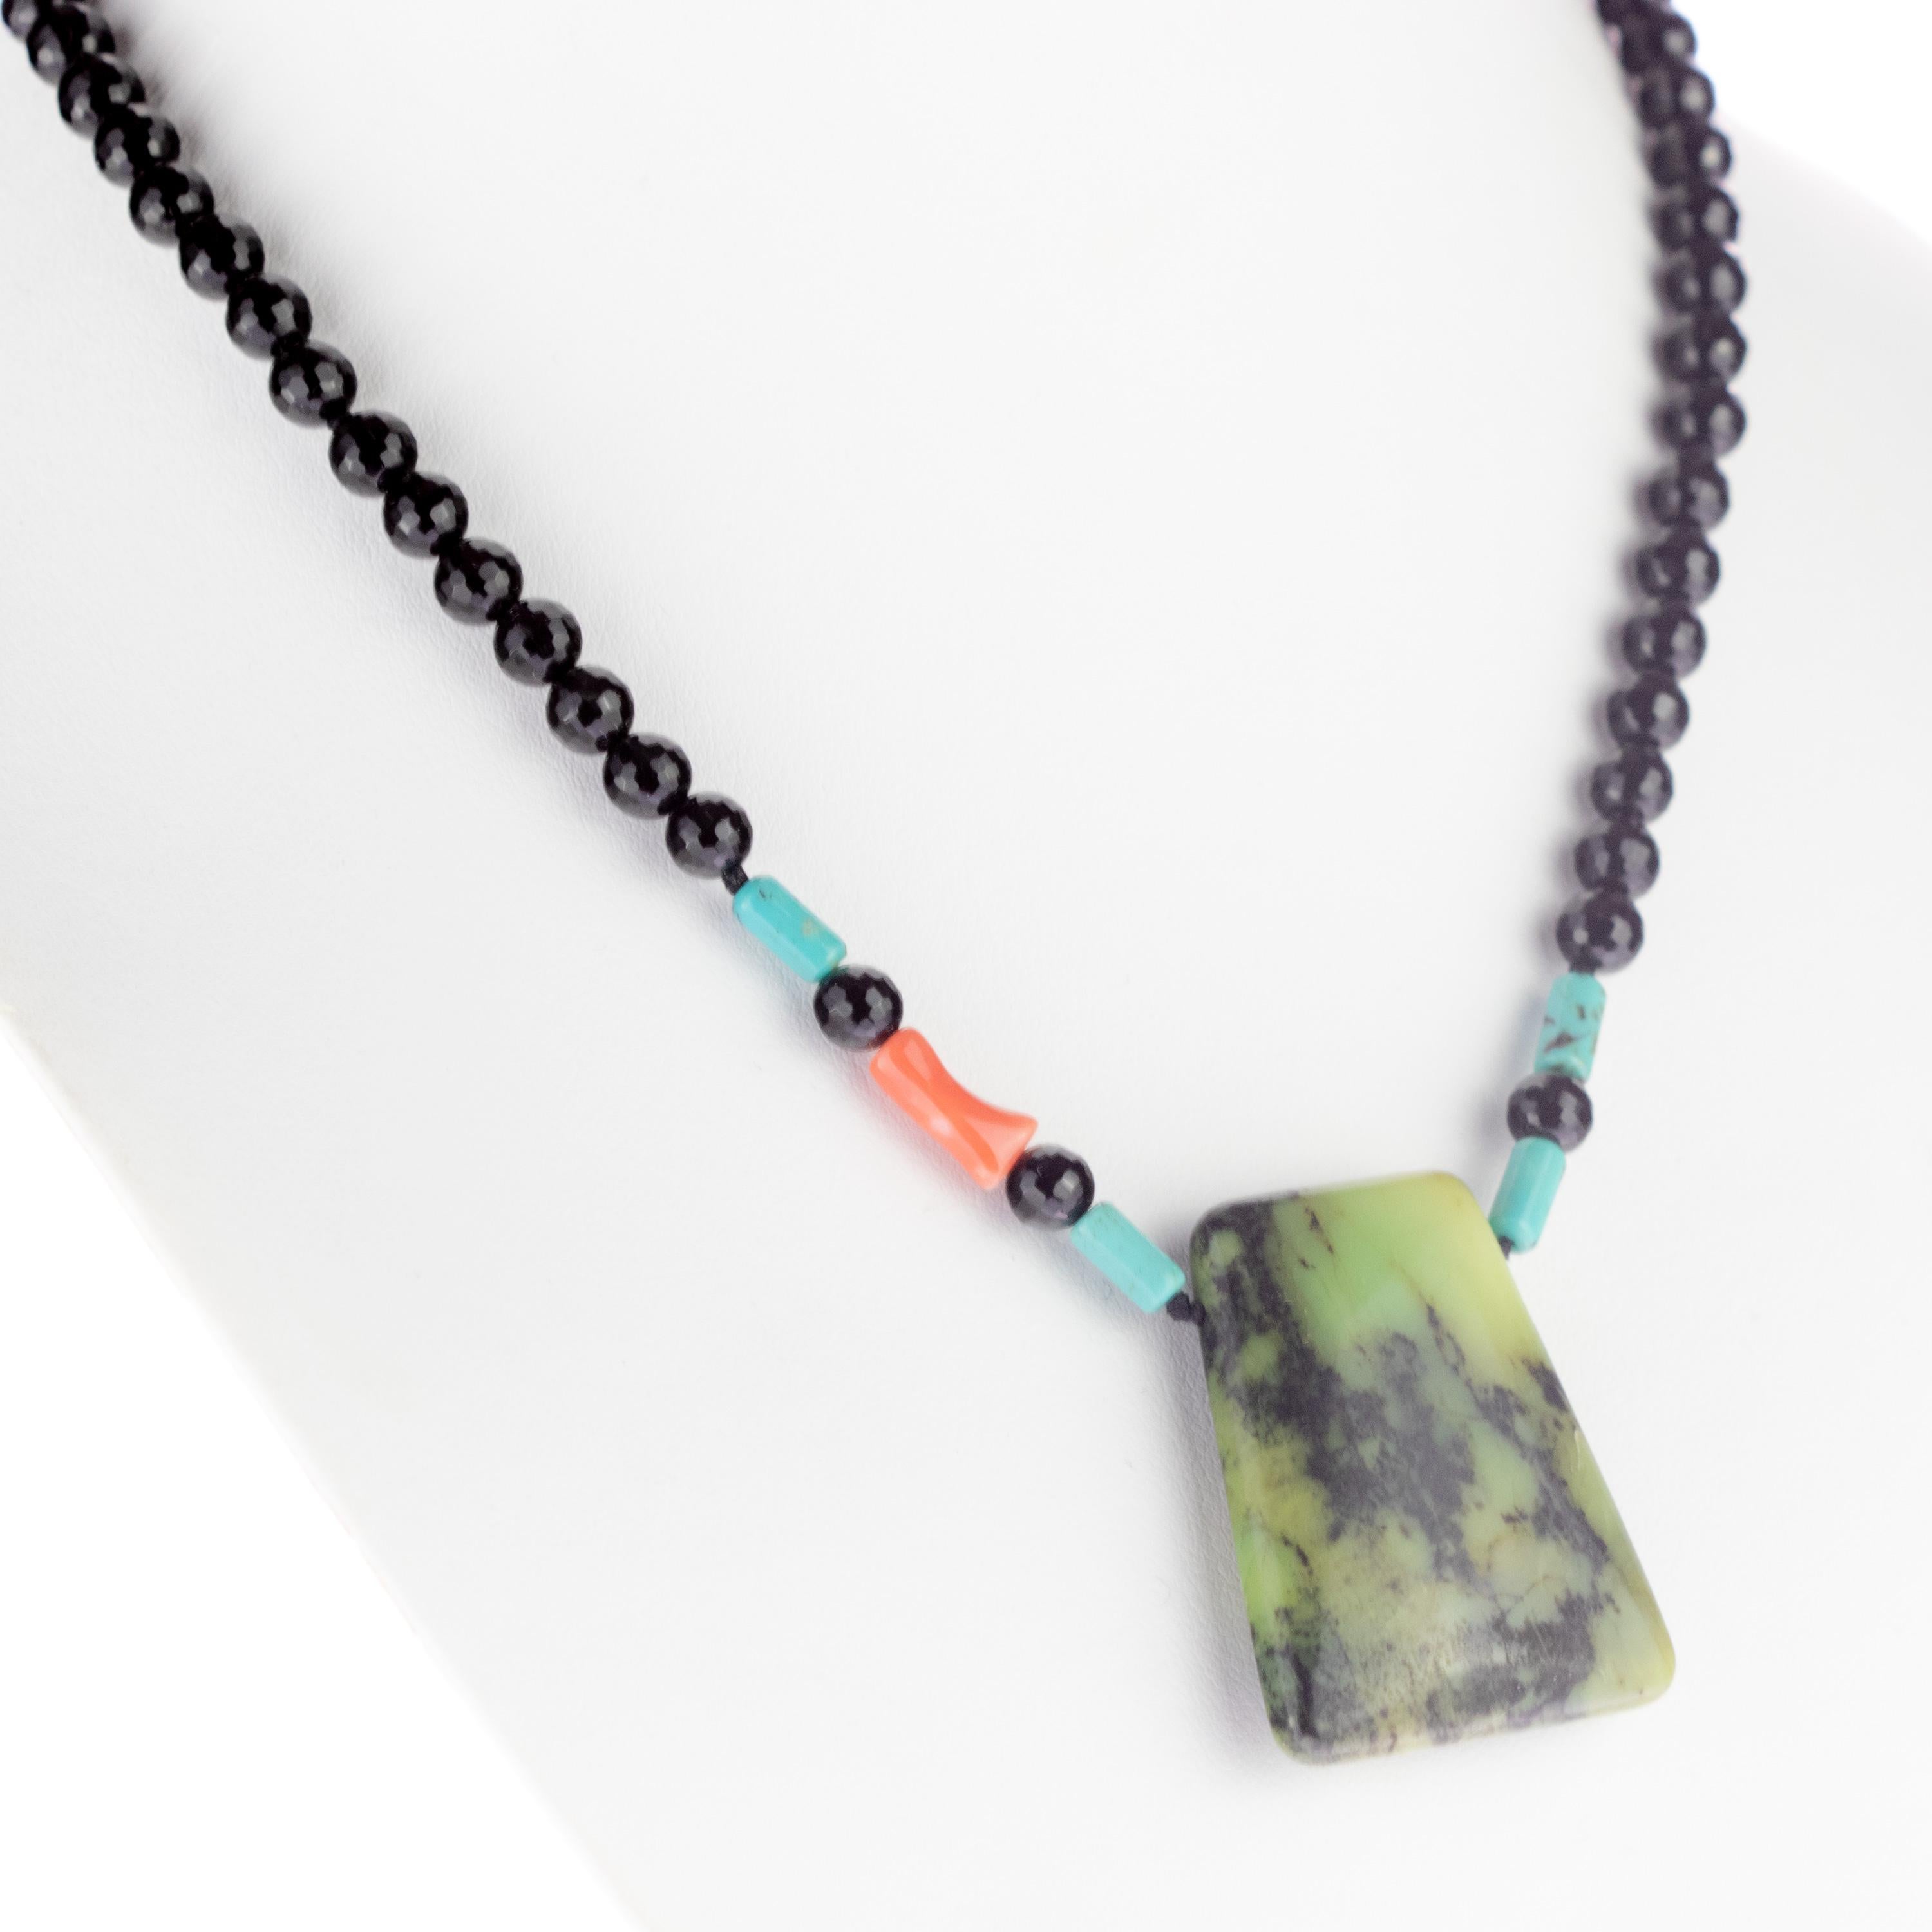 A unique design made with black Agate, Turquoise, Coral and a central pendant of Chrysoprase.

Handmade in Italy with fine precious stones, ethical and natural.

Fits with elegant outfits as well as for a casual look.

Enjoy the brightness of